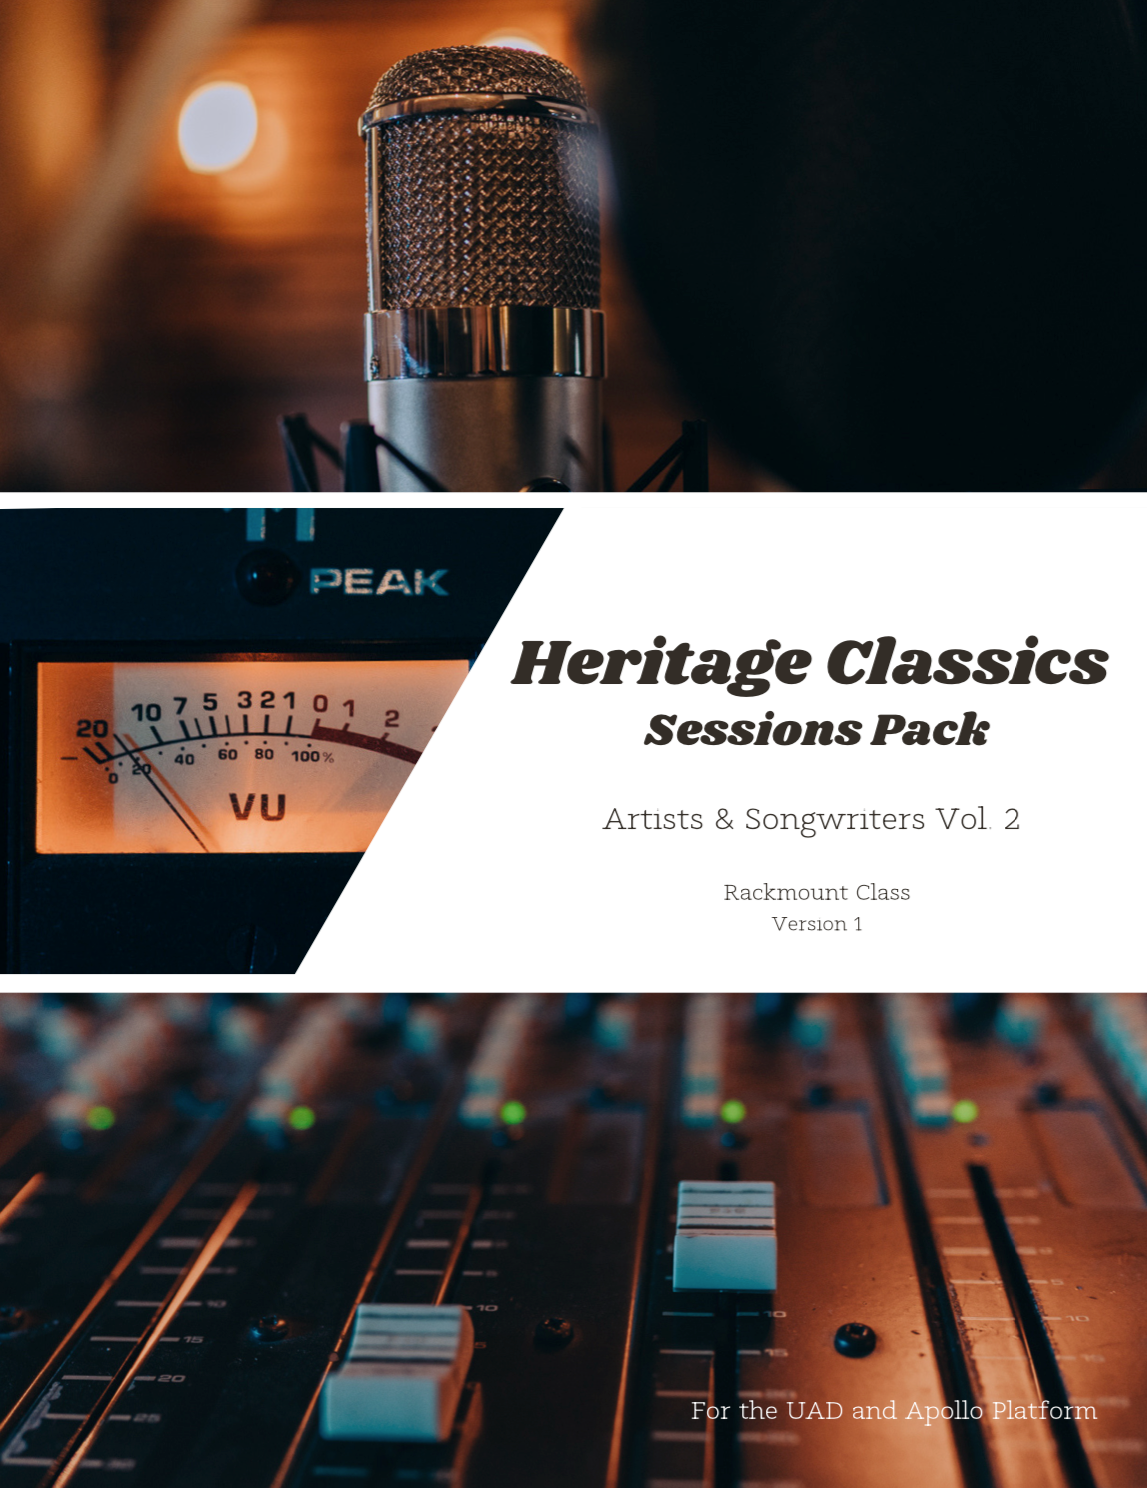 Heritage Classics Sessions Pack - Rackmount Class